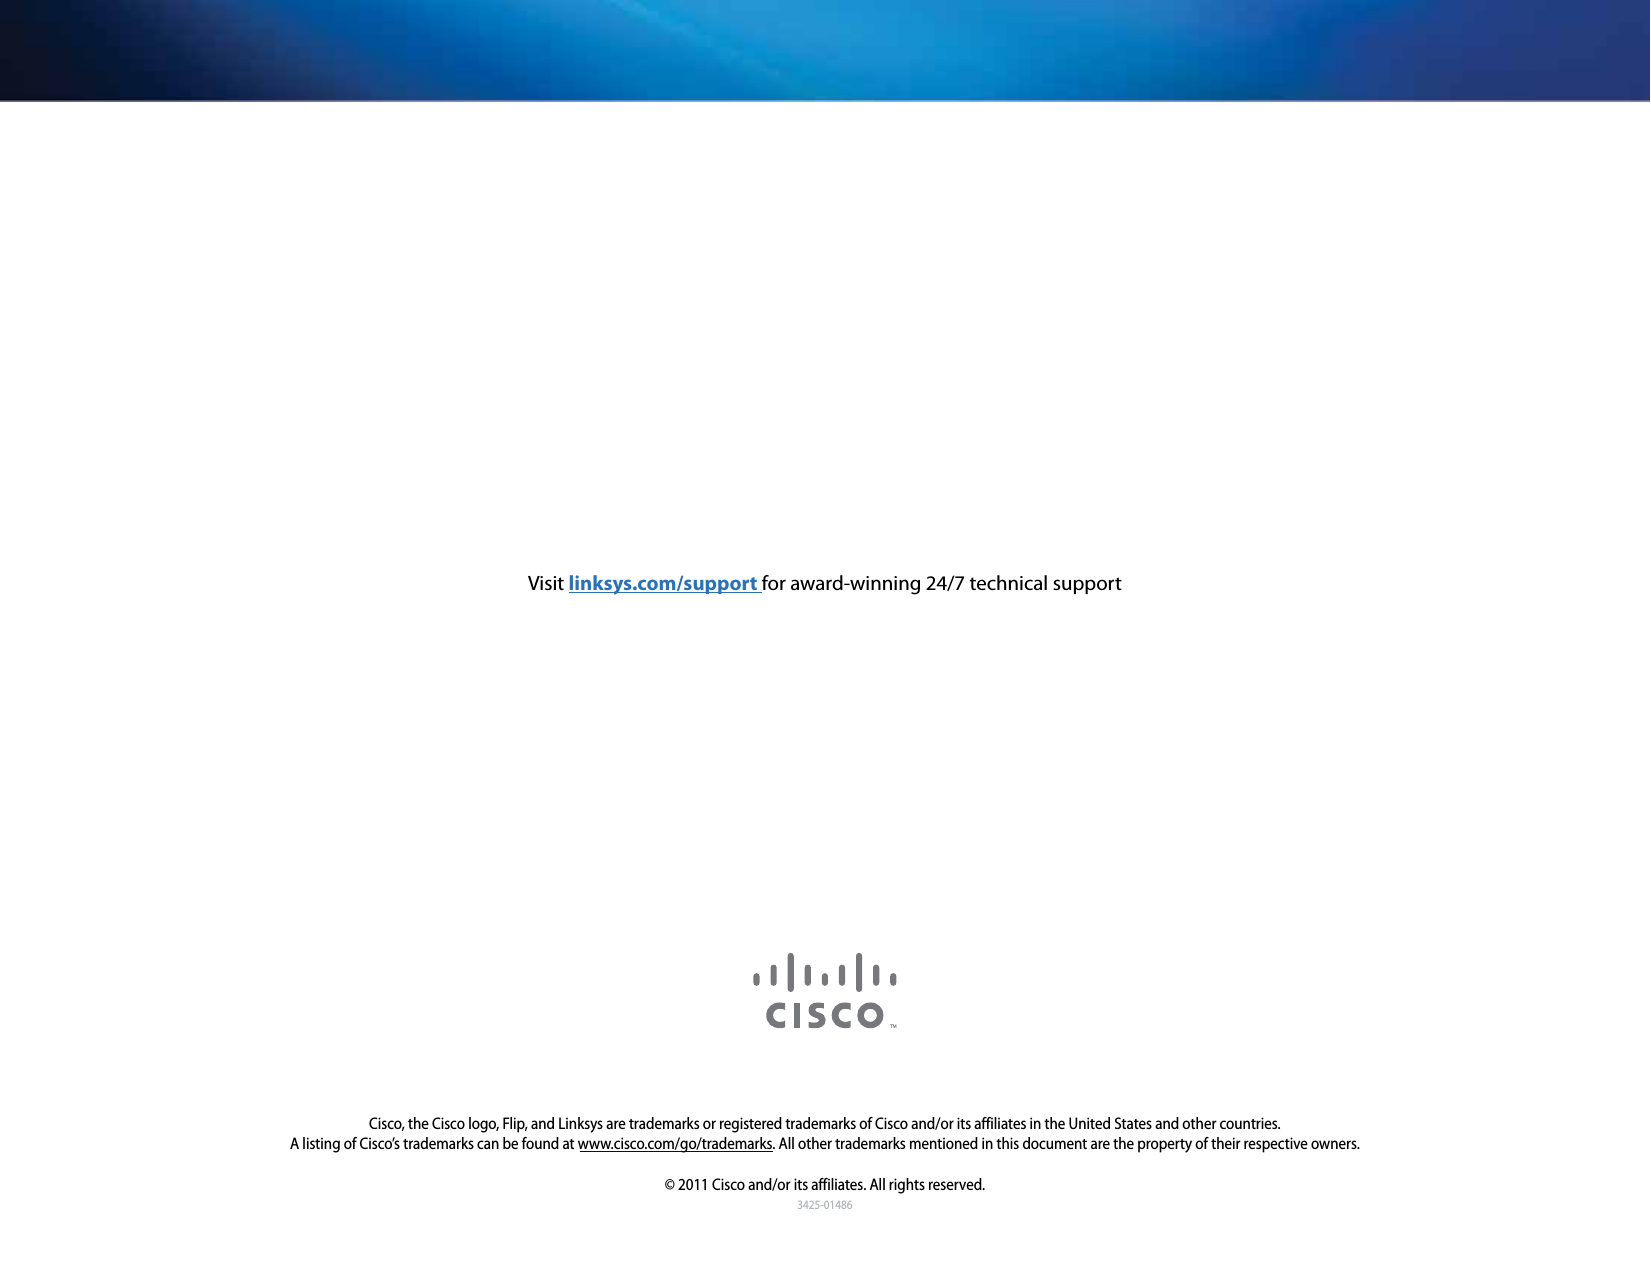 3425-01486Cisco, the Cisco logo, Flip, and Linksys are trademarks or registered trademarks of Cisco and/or its affiliates in the United States and other countries. A listing of Cisco’s trademarks can be found at www.cisco.com/go/trademarks. All other trademarks mentioned in this document are the property of their respective owners.© 2011 Cisco and/or its affiliates. All rights reserved.Visit linksys.com/support for award-winning 24/7 technical support